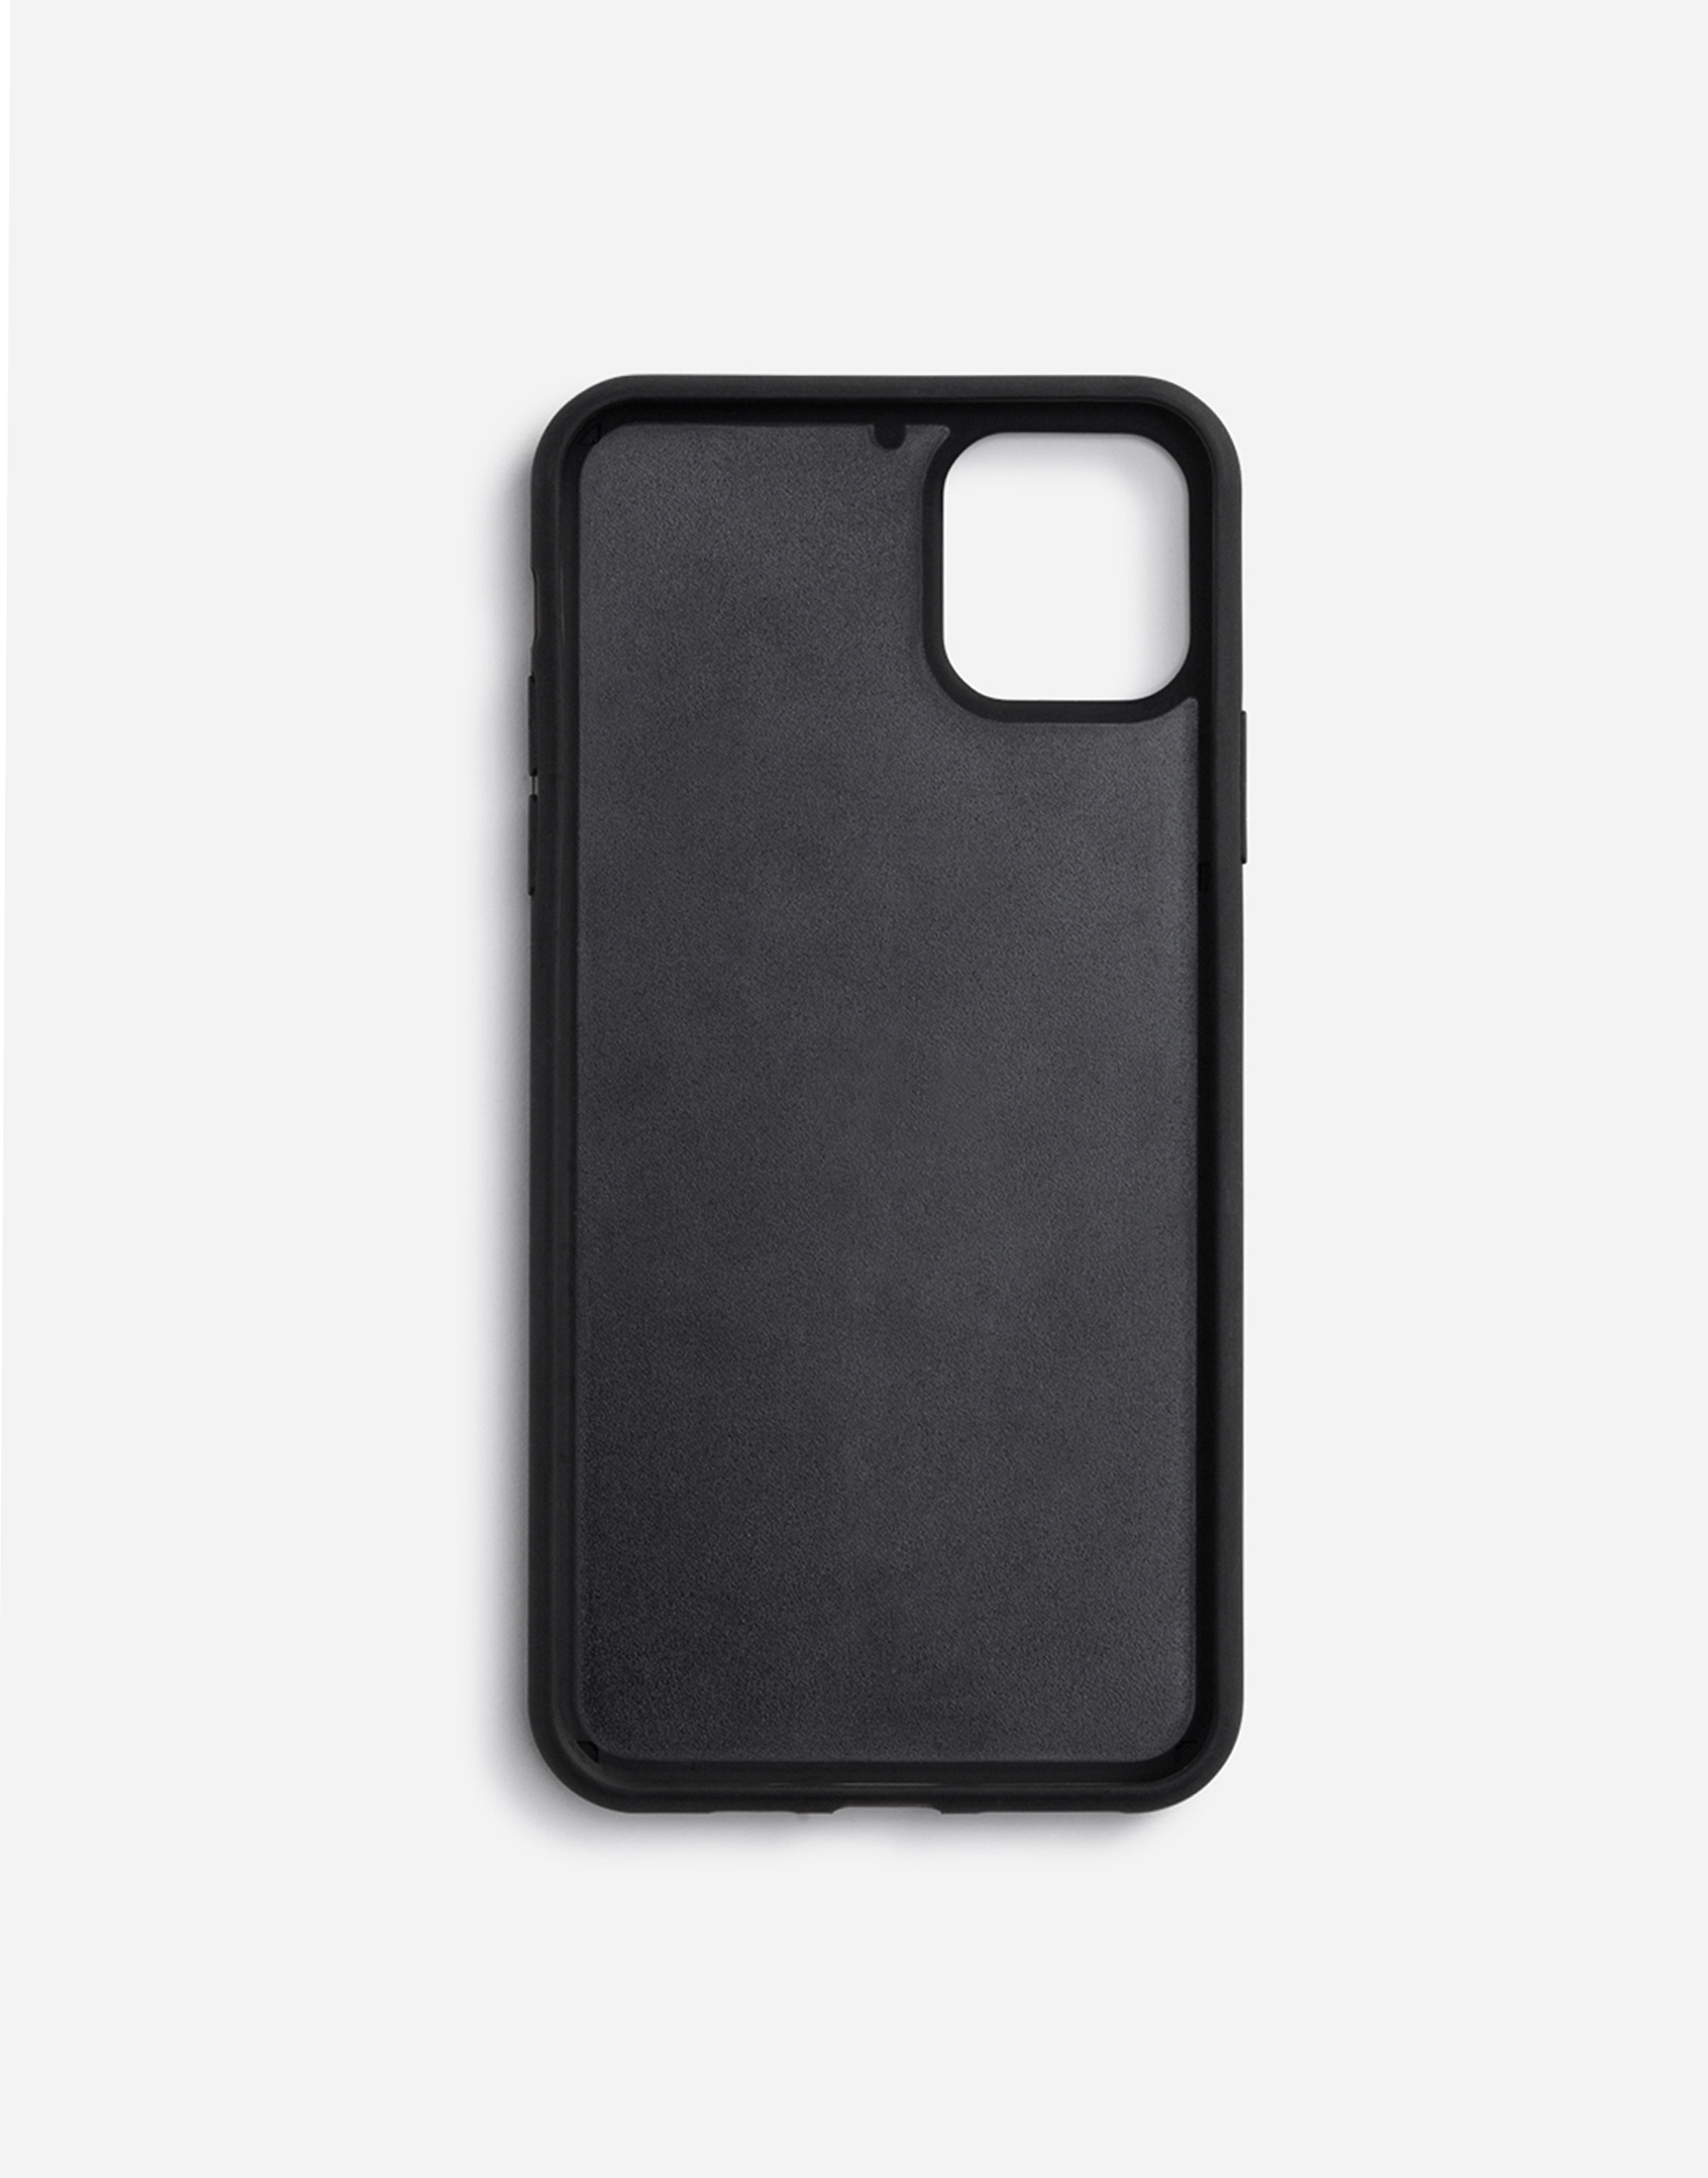 Dauphine calfskin iPhone 11 Pro max cover with branded plate